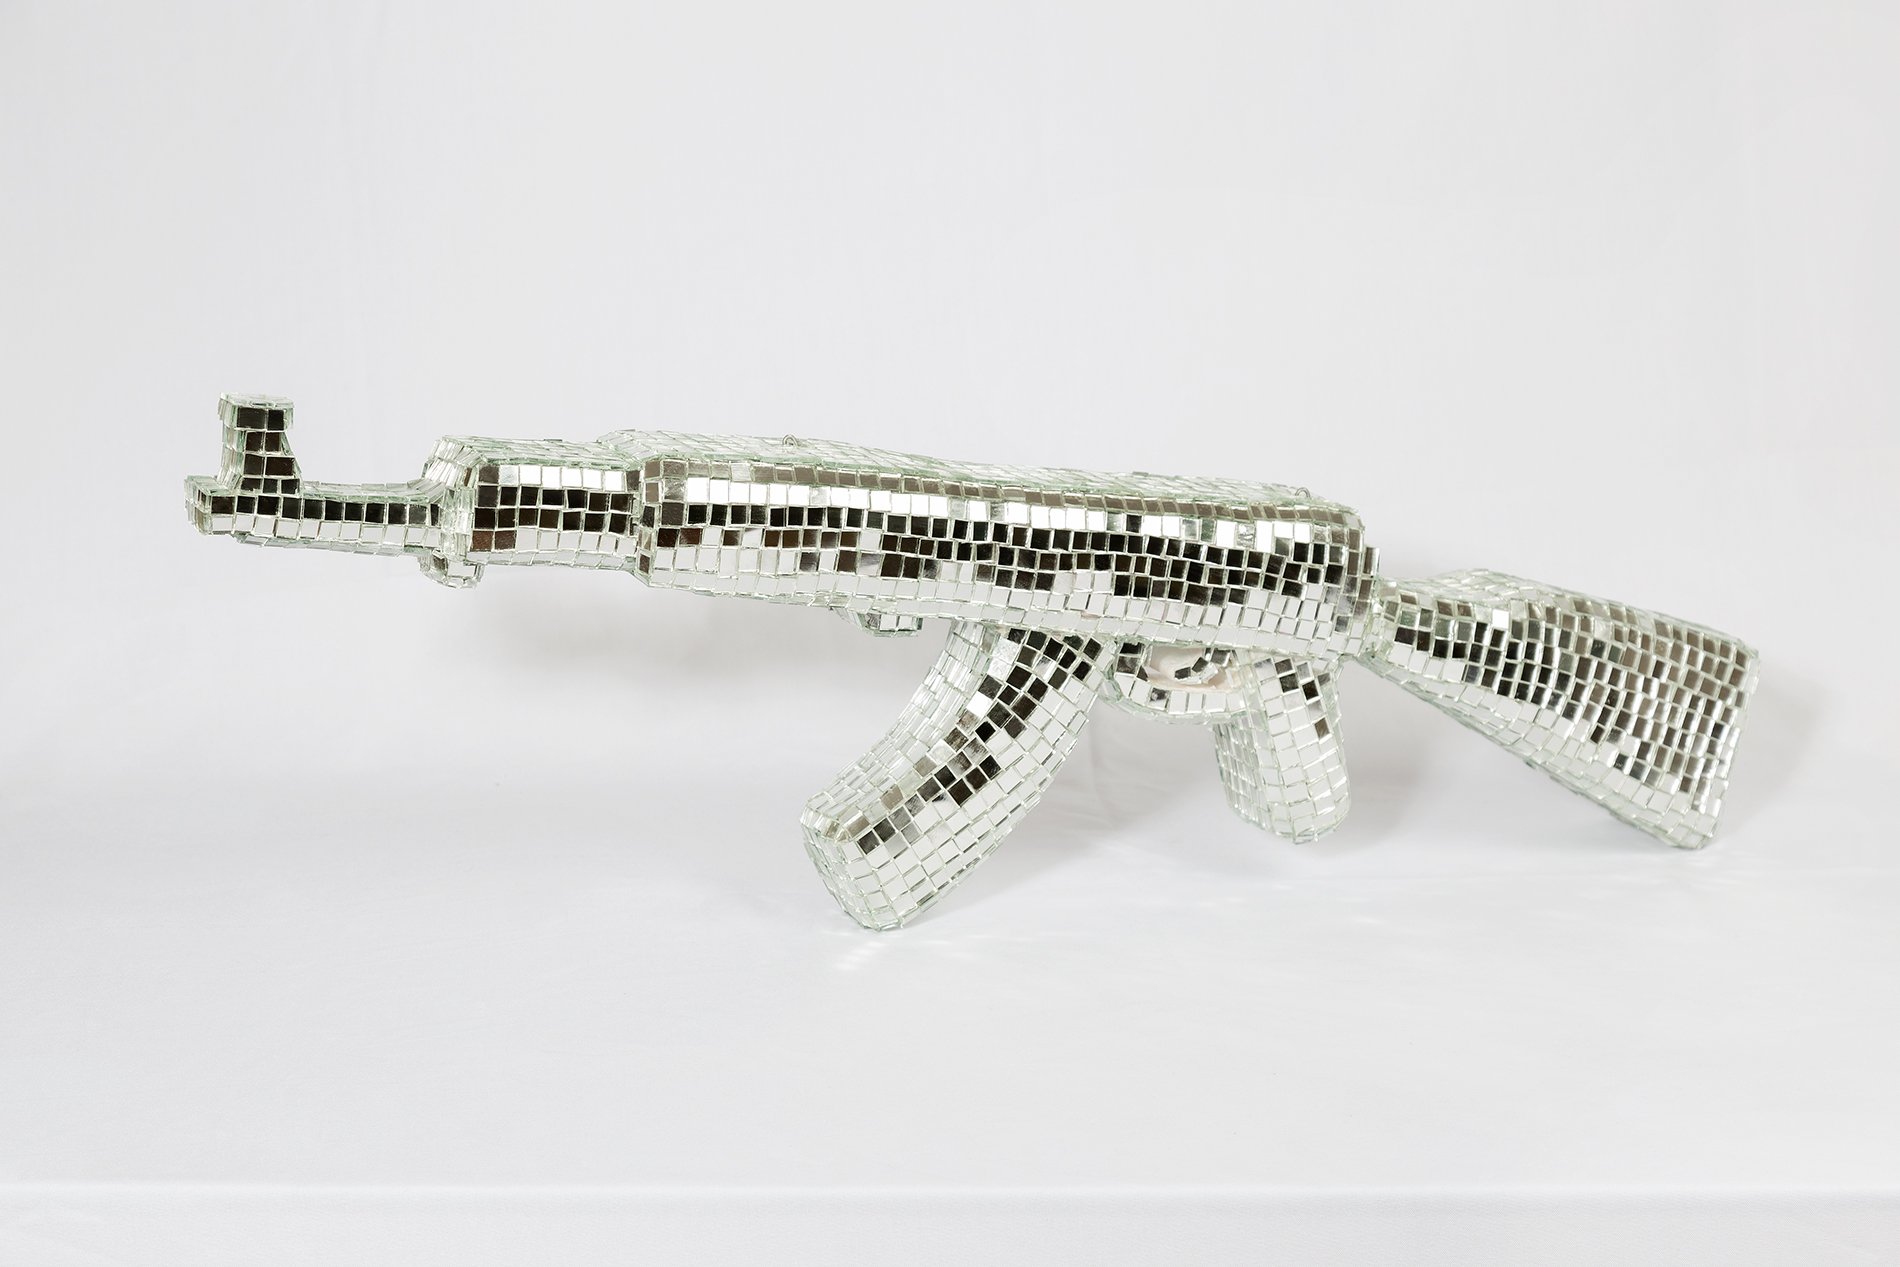 "AK-47, from the series Disco Objects"